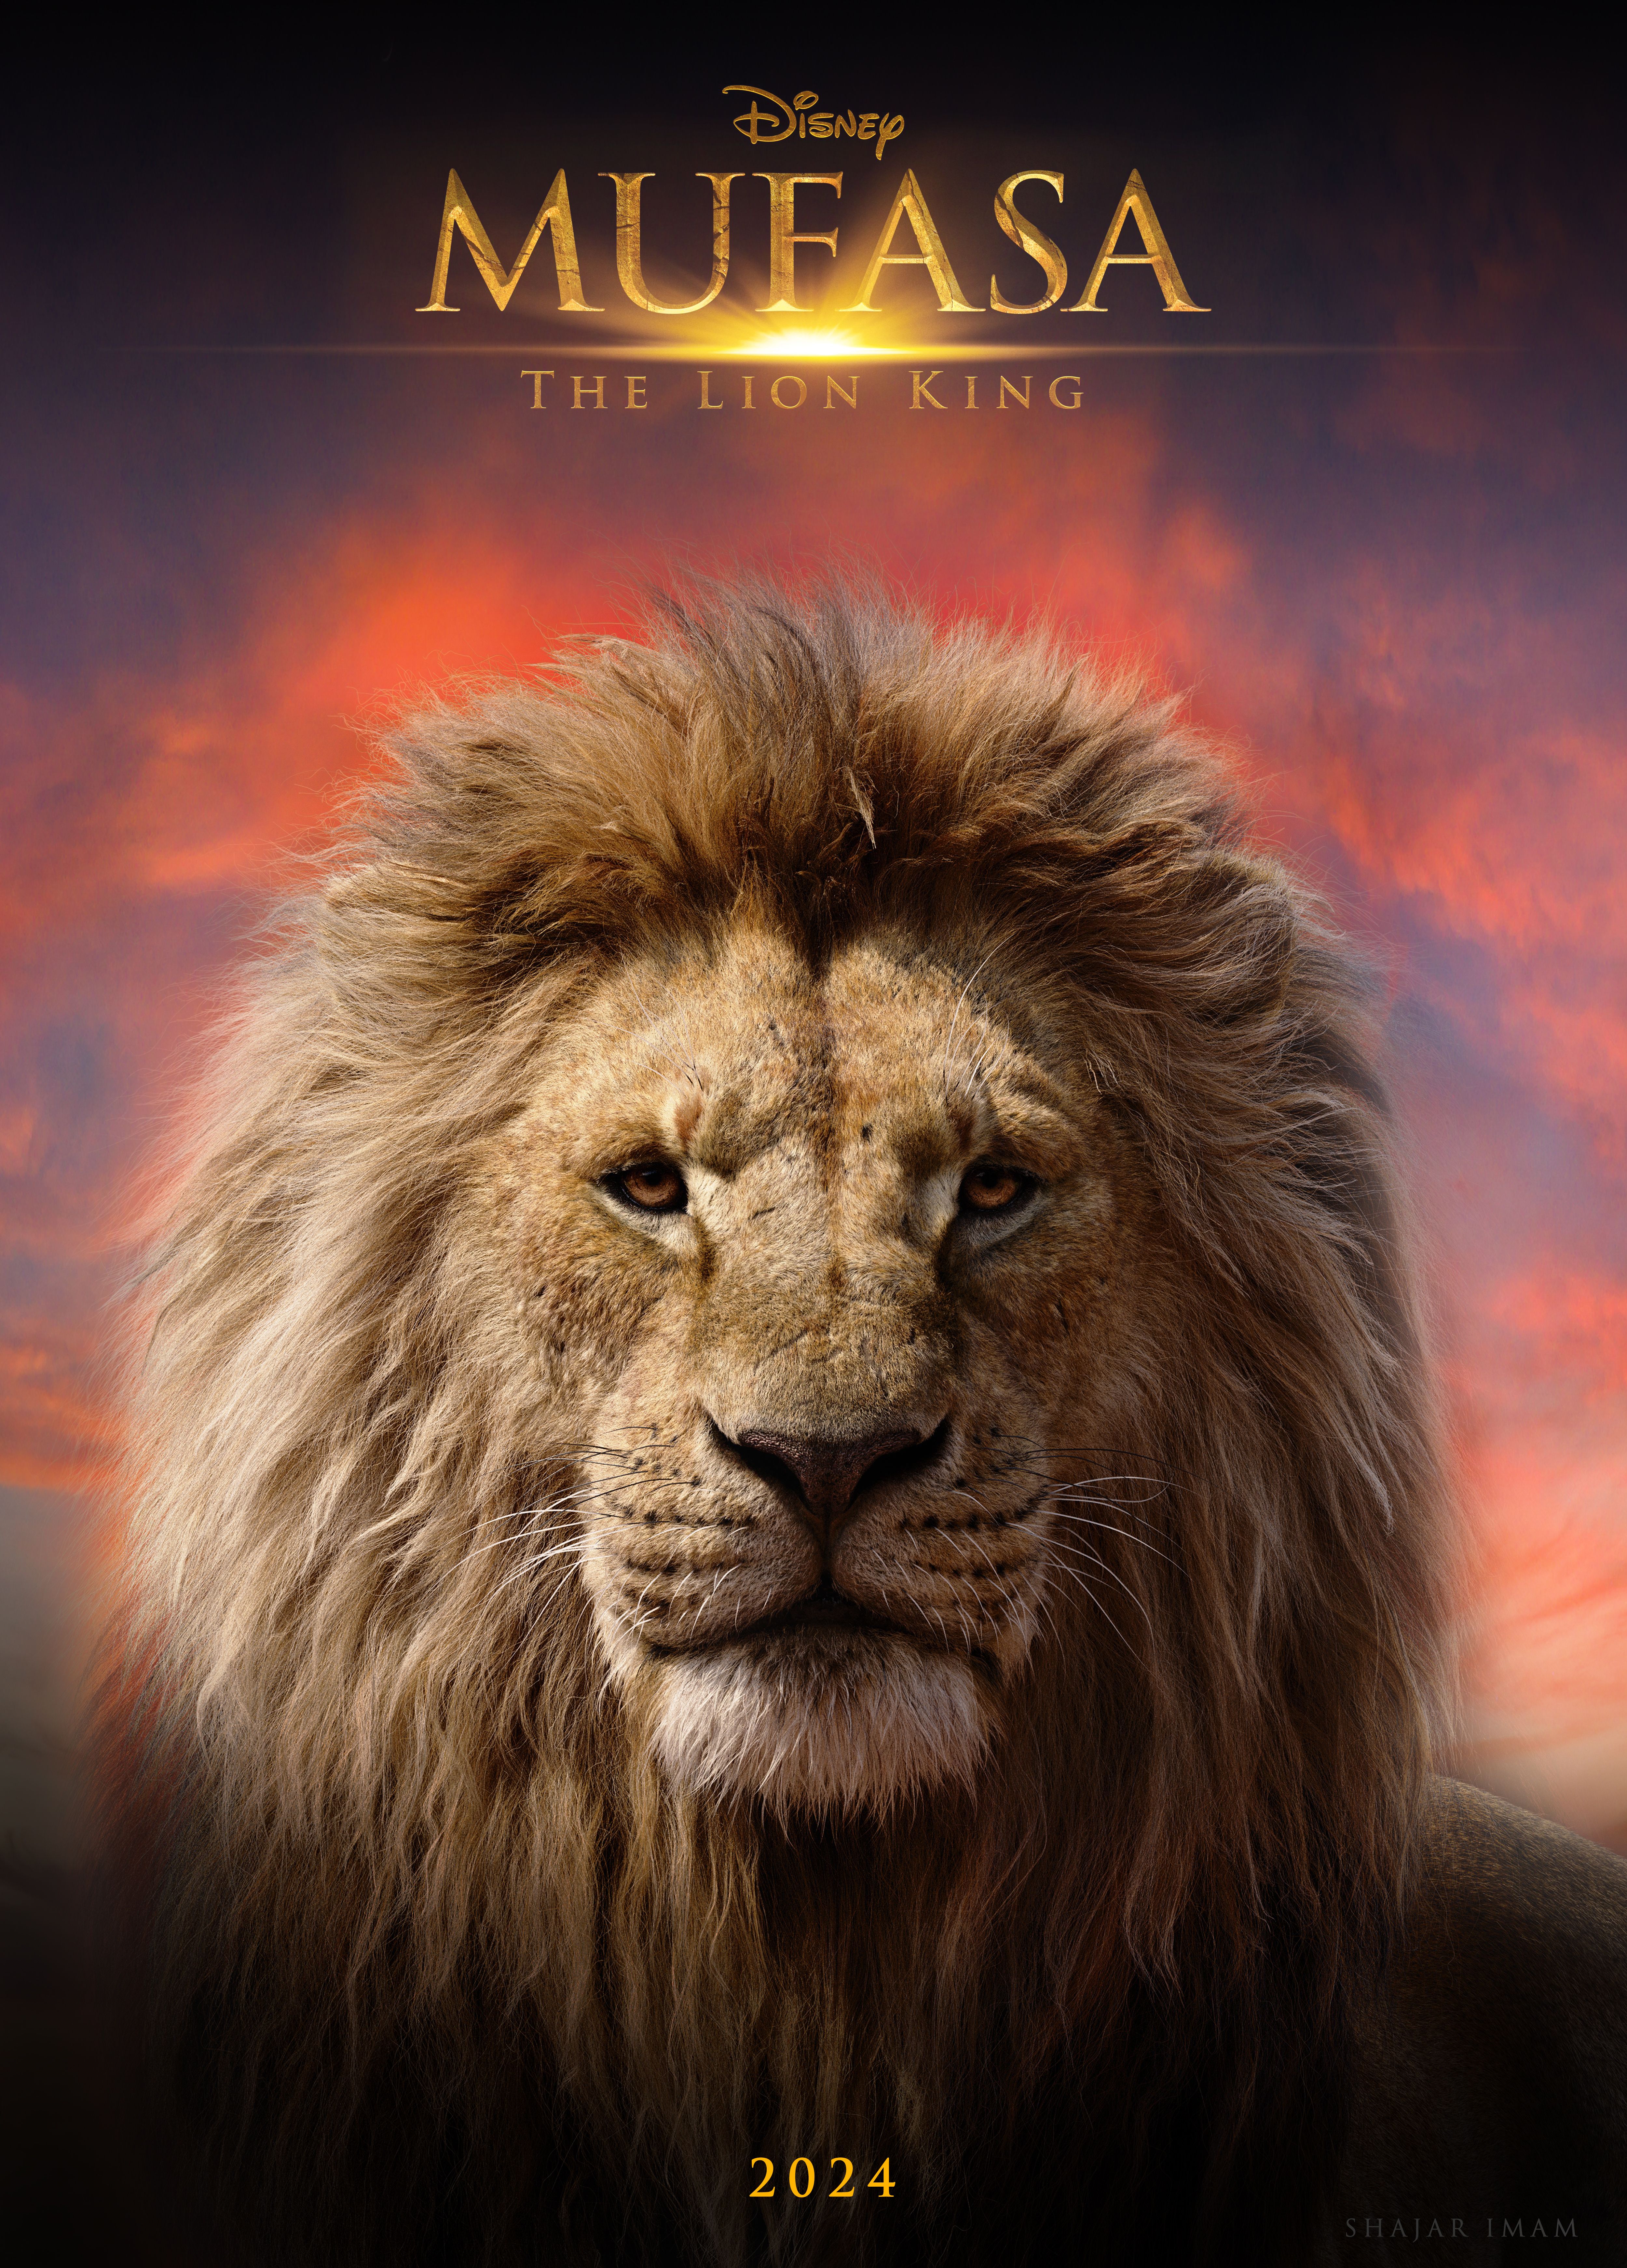 The Lion King 2024 poster - The Lion King